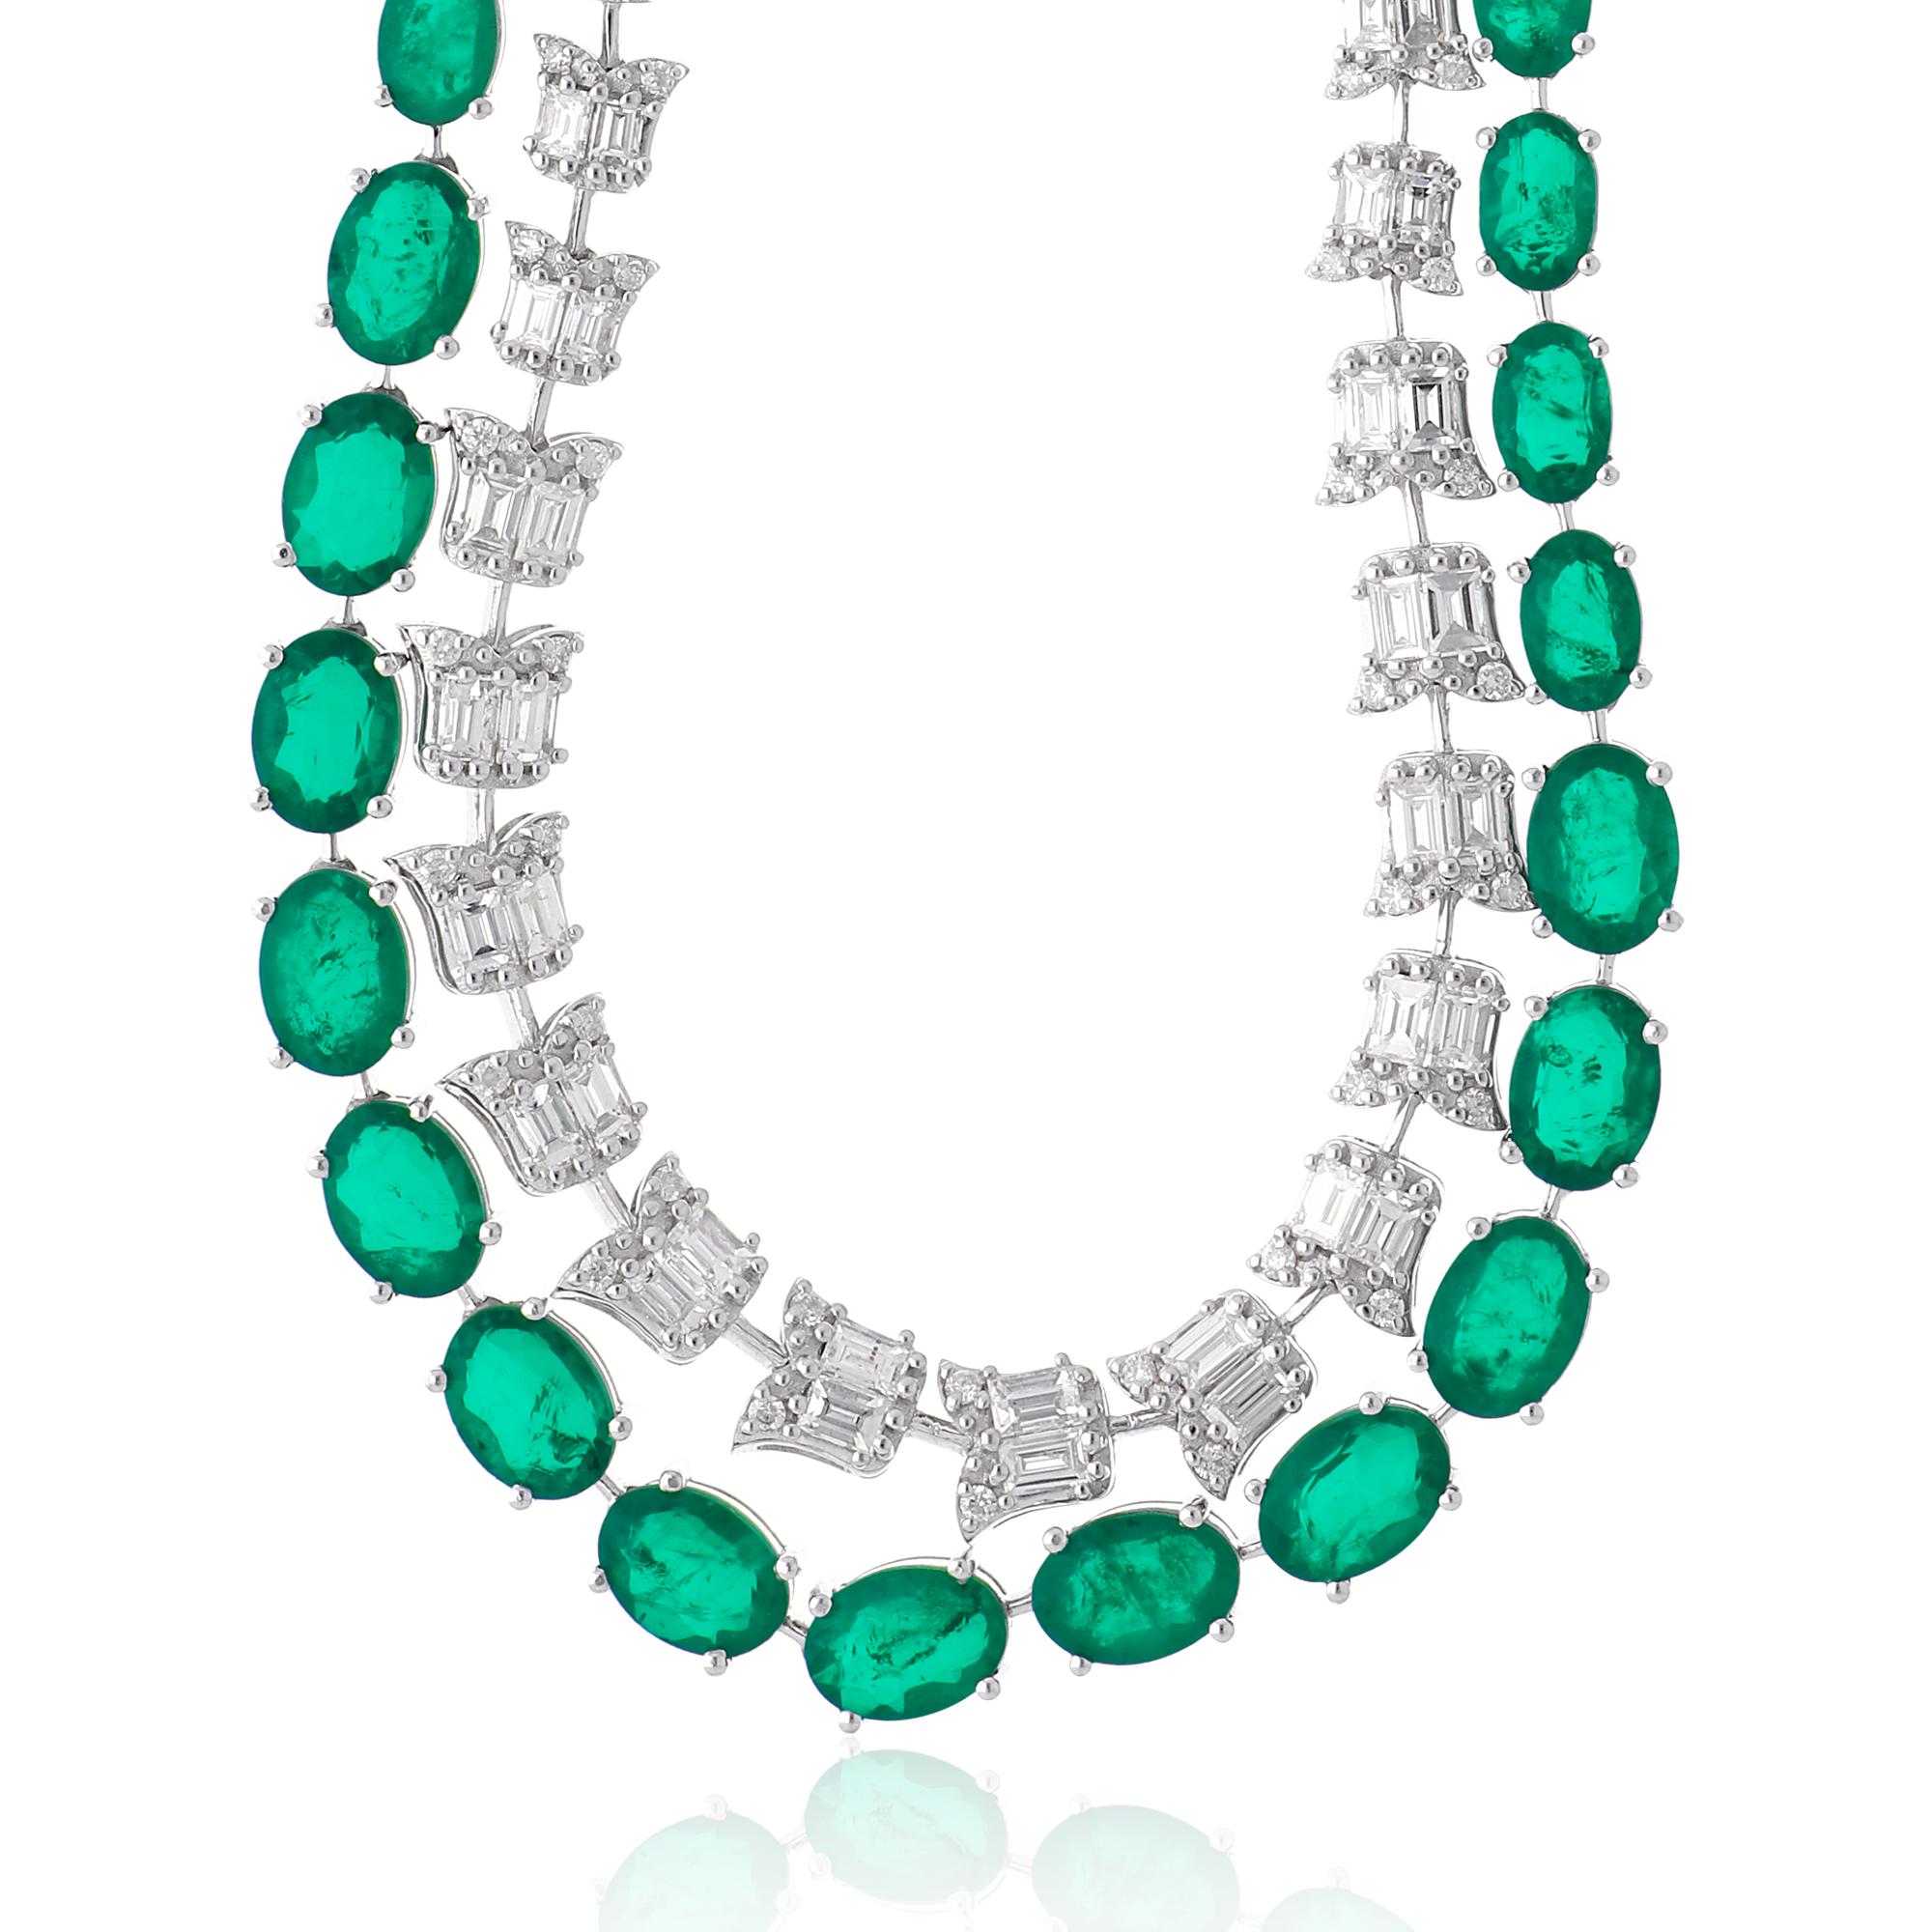 The centerpiece of this necklace is a stunning oval-shaped emerald, carefully selected for its rich hue and natural brilliance. The emerald is securely set in a bezel setting, adding a touch of modern sophistication to the design. Surrounding the